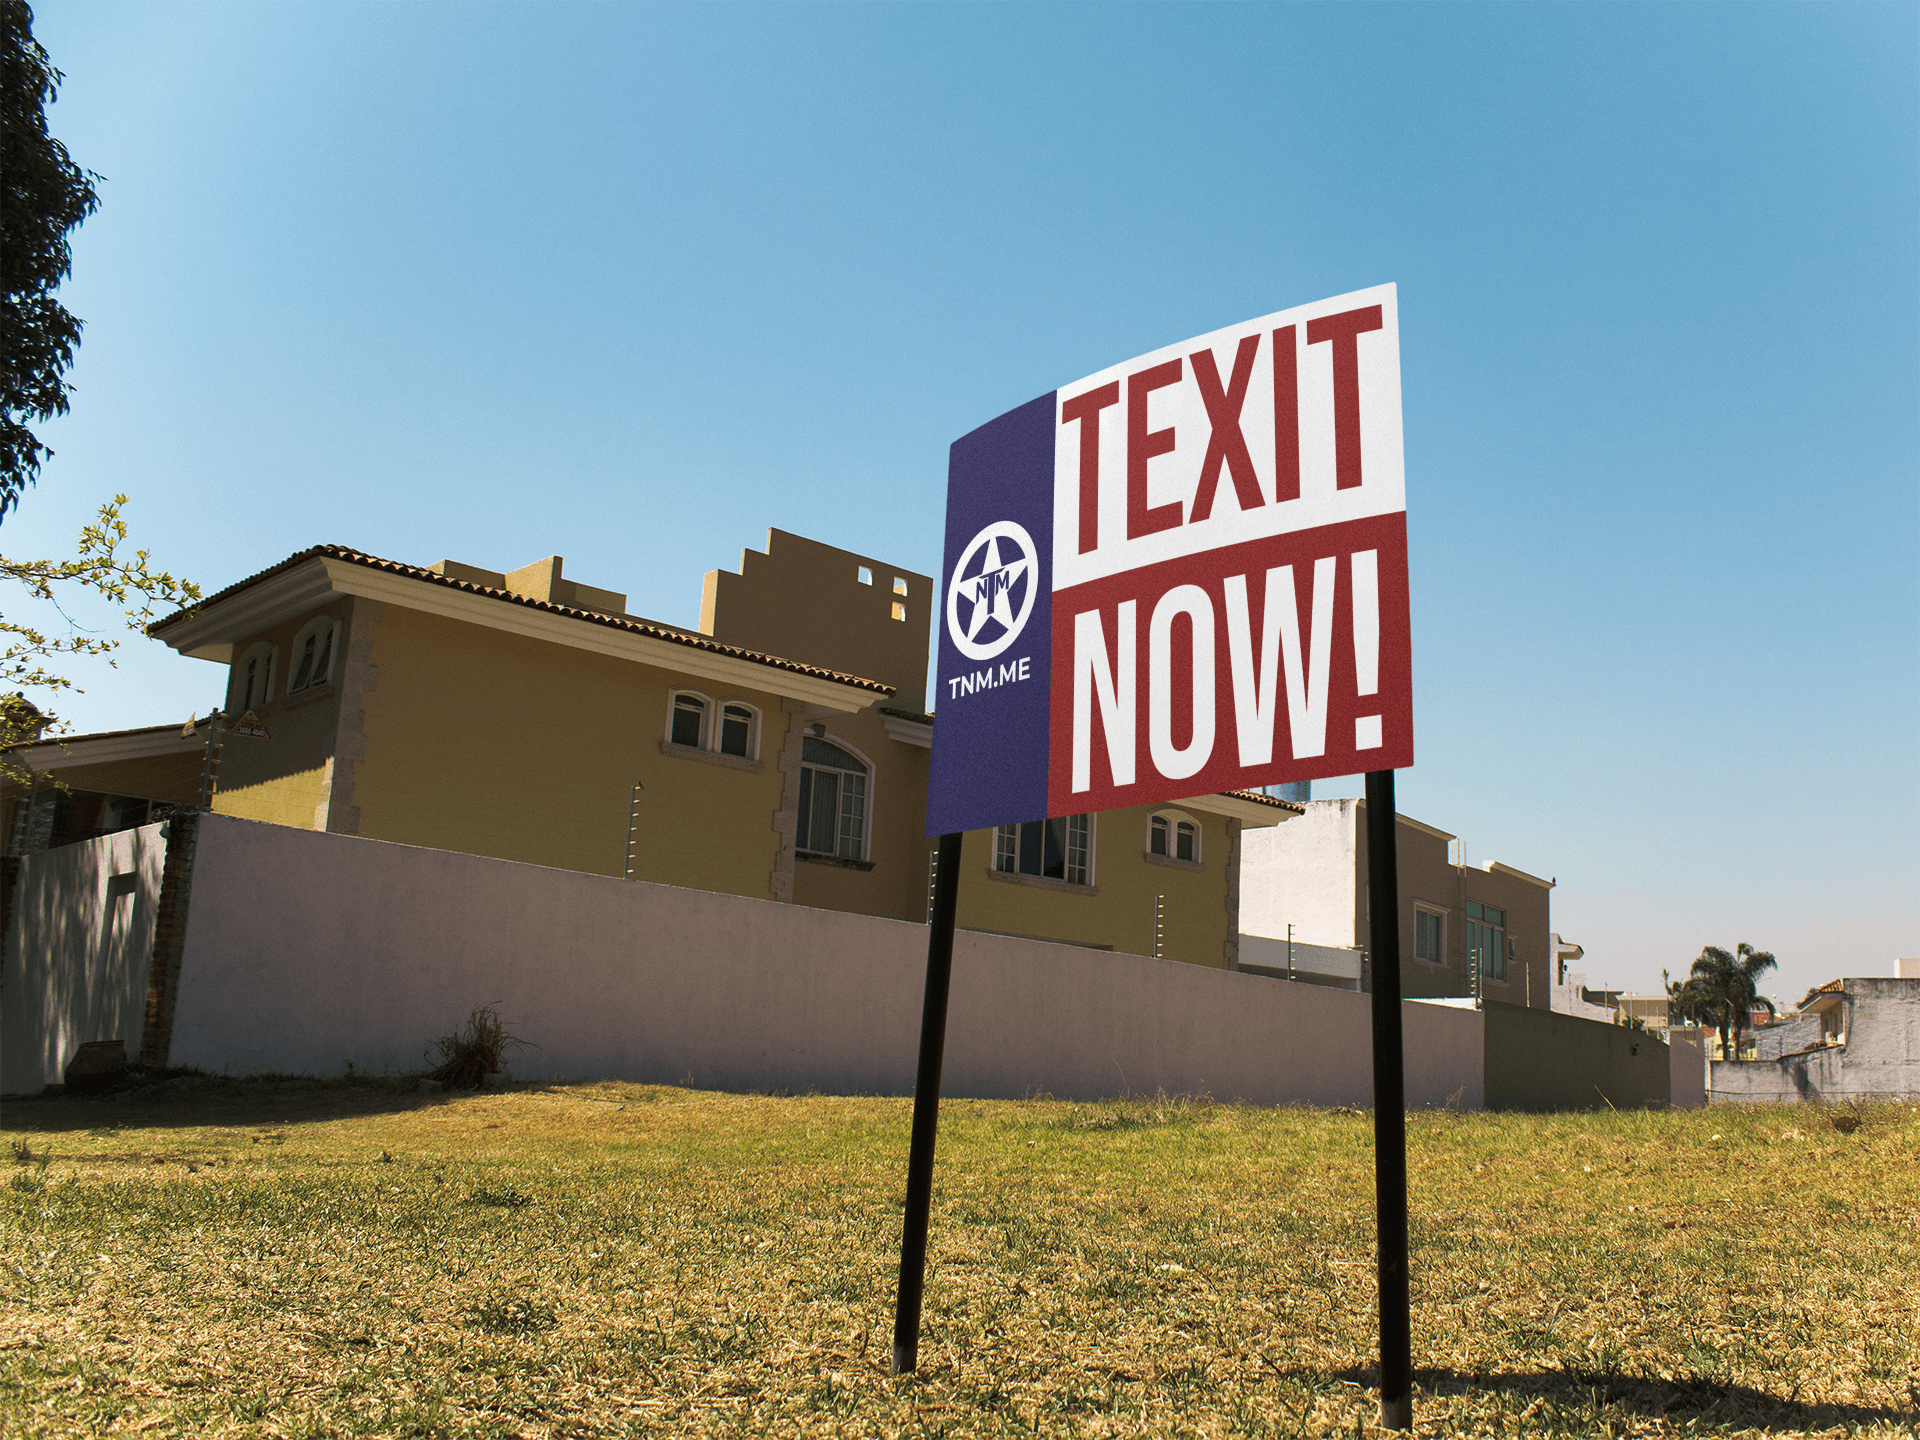 real-estate-lawn-sign-mockup-in-a-back-garden-of-a-house-a14983-1.png